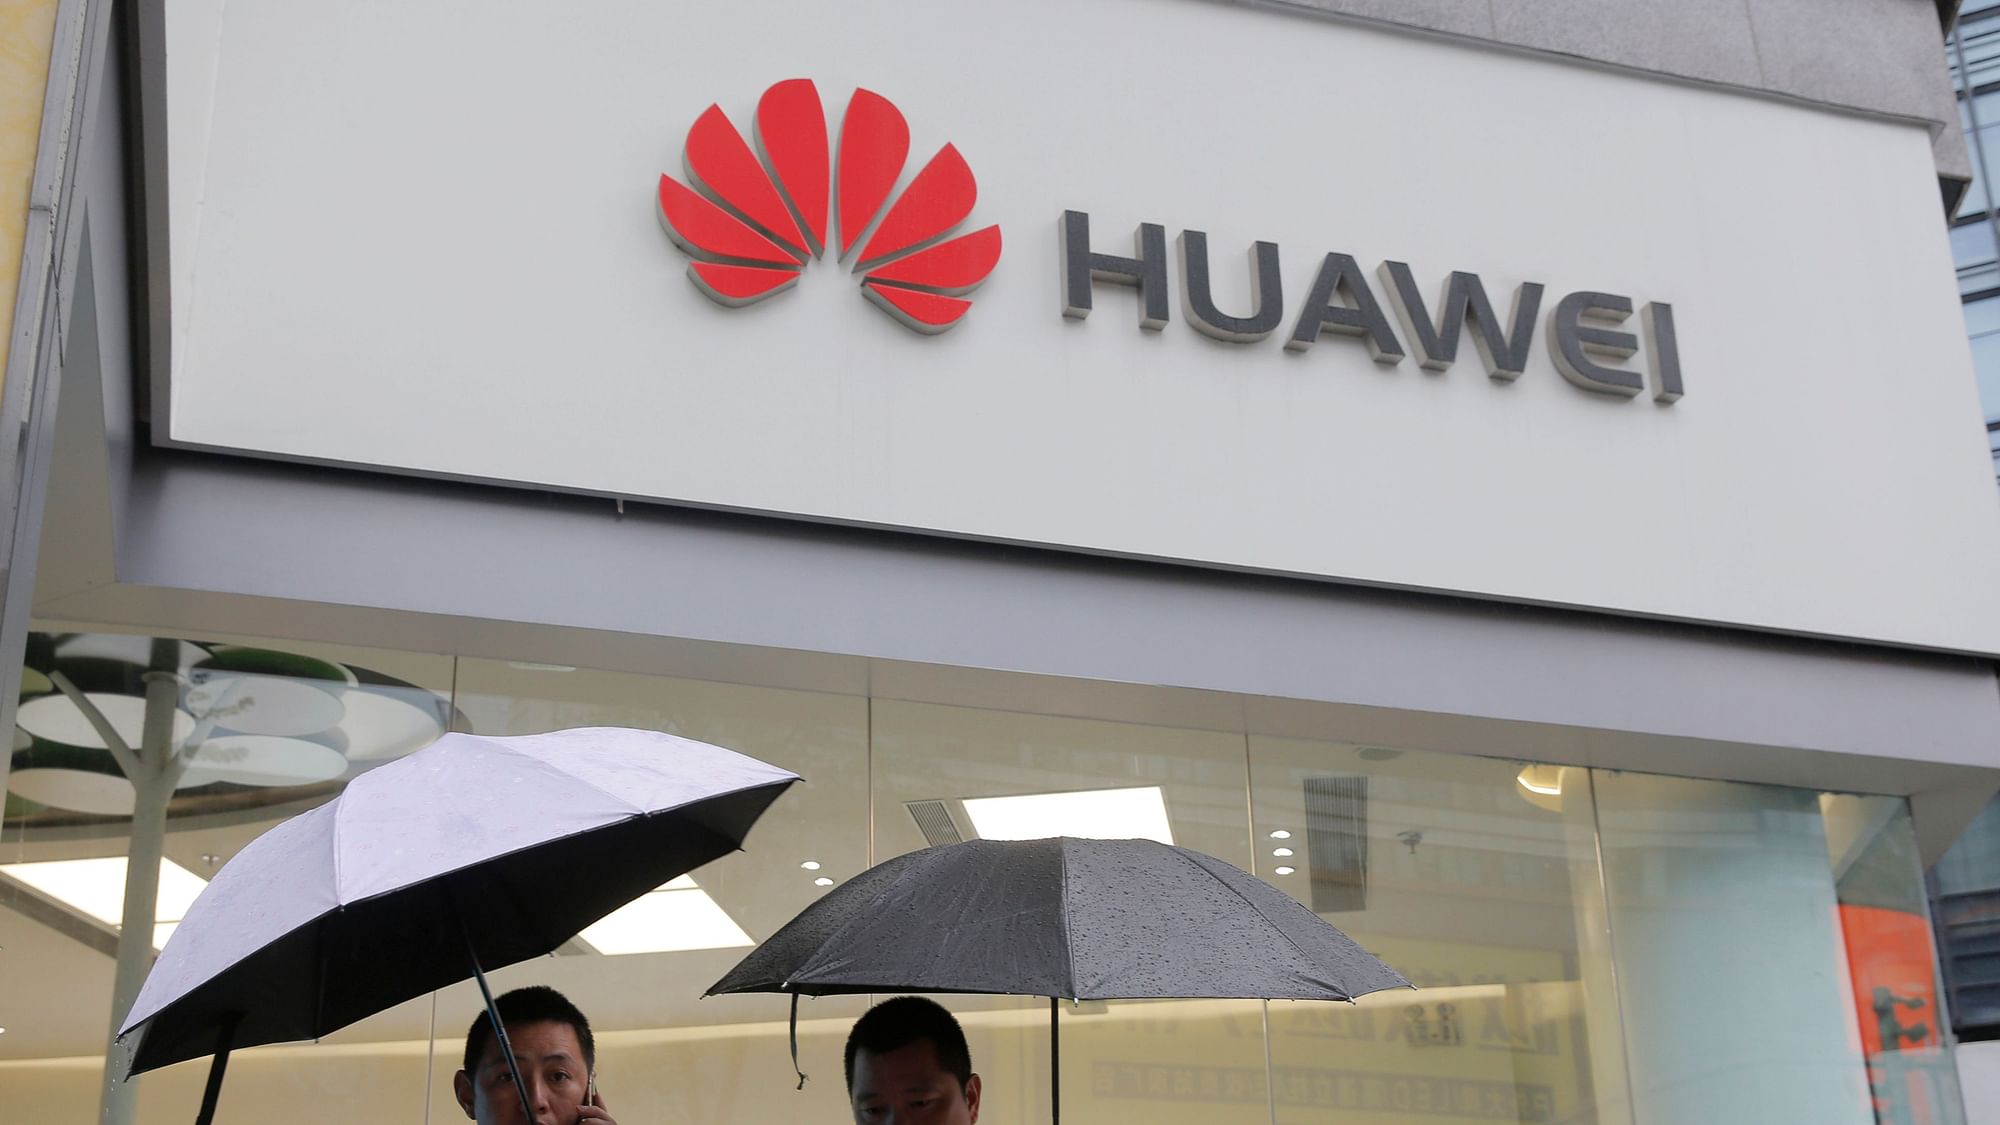 British cybersecurity inspectors said they have found significant technical issues in Chinese telecom supplier Huawei’s software that pose risks for the country’s mobile networks.